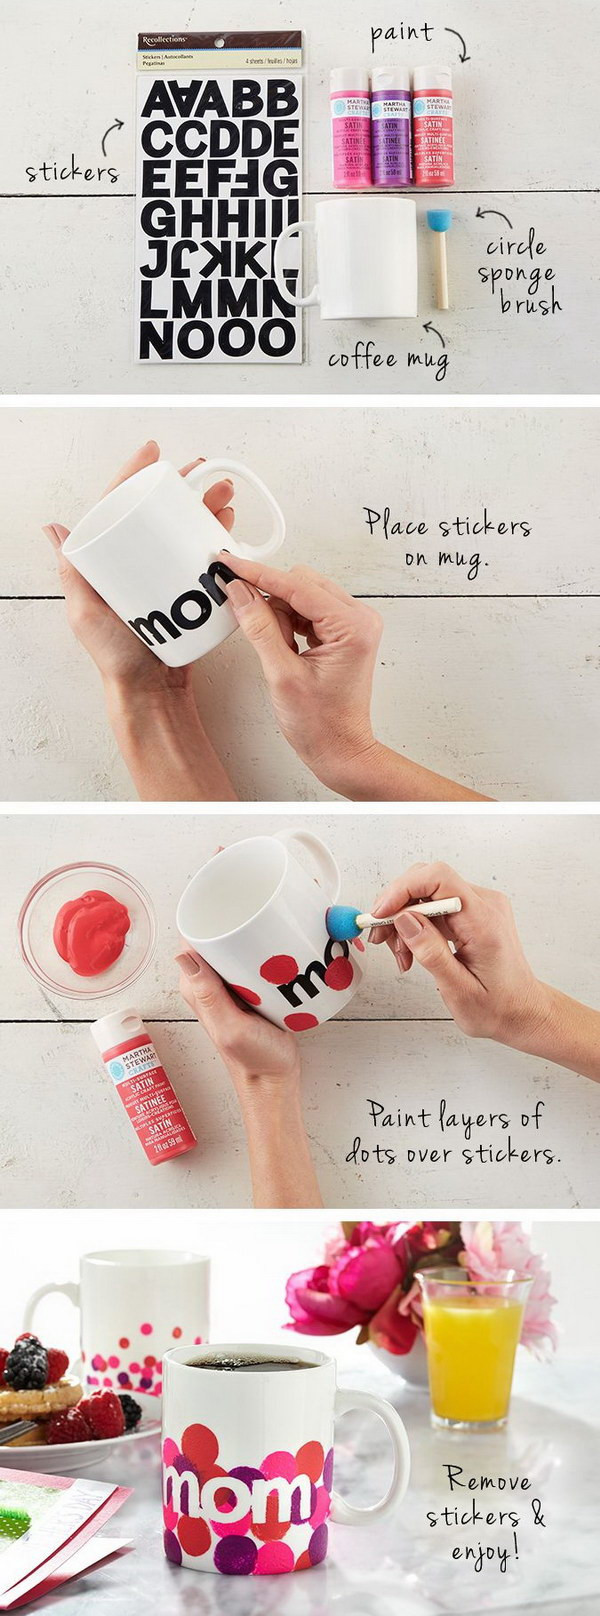 DIY Gifts For Your Mom
 20 Heartfelt DIY Gifts for Mom Noted List